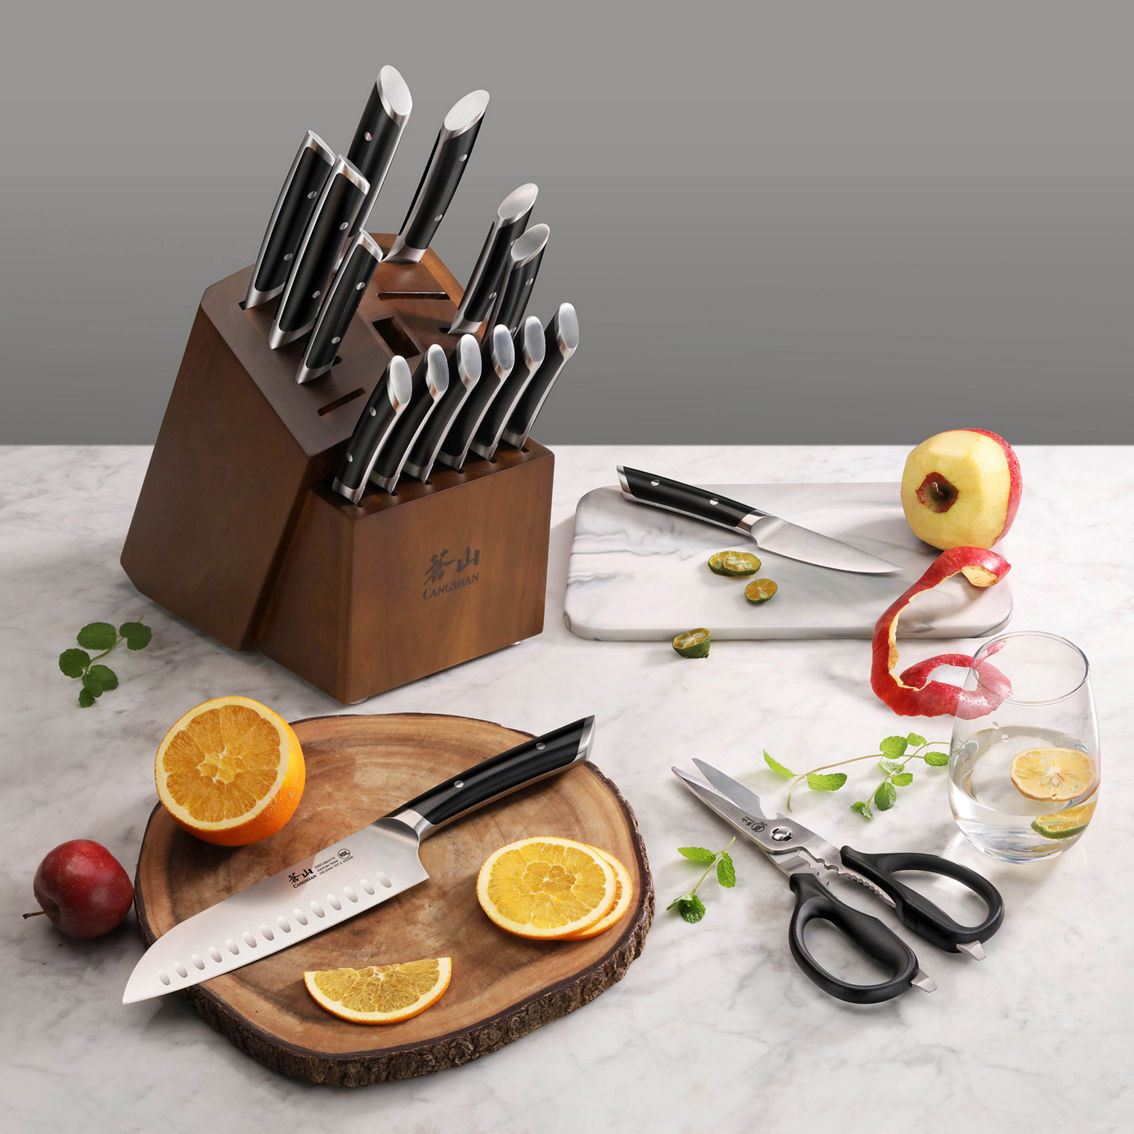 Cangshan Cutlery Helena Series Black 17 pc. Forged Knife Block Set - Image 4 of 6